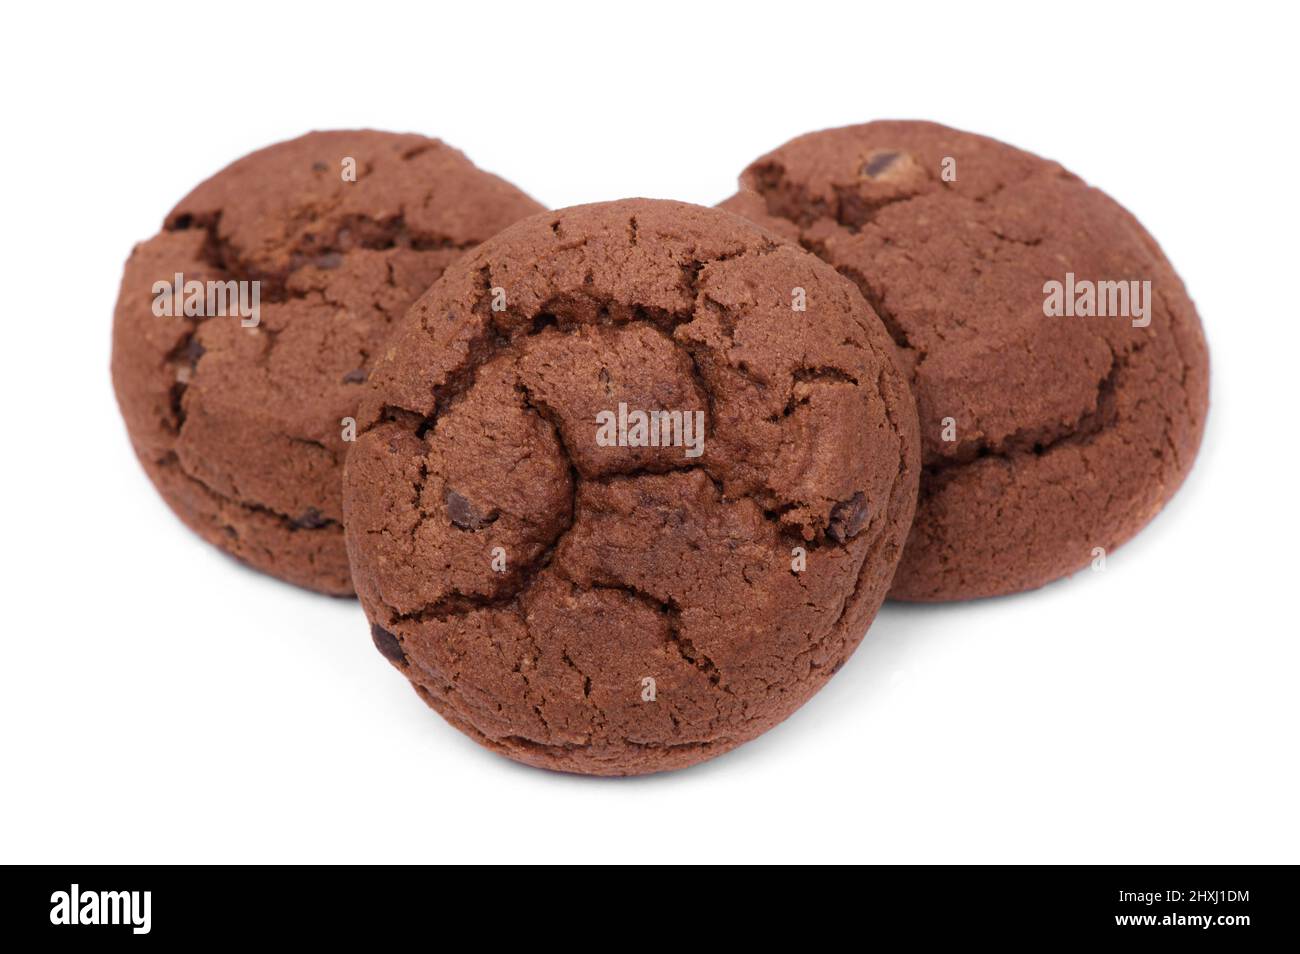 Chocolate oatmeal cookies isolated over white background Stock Photo